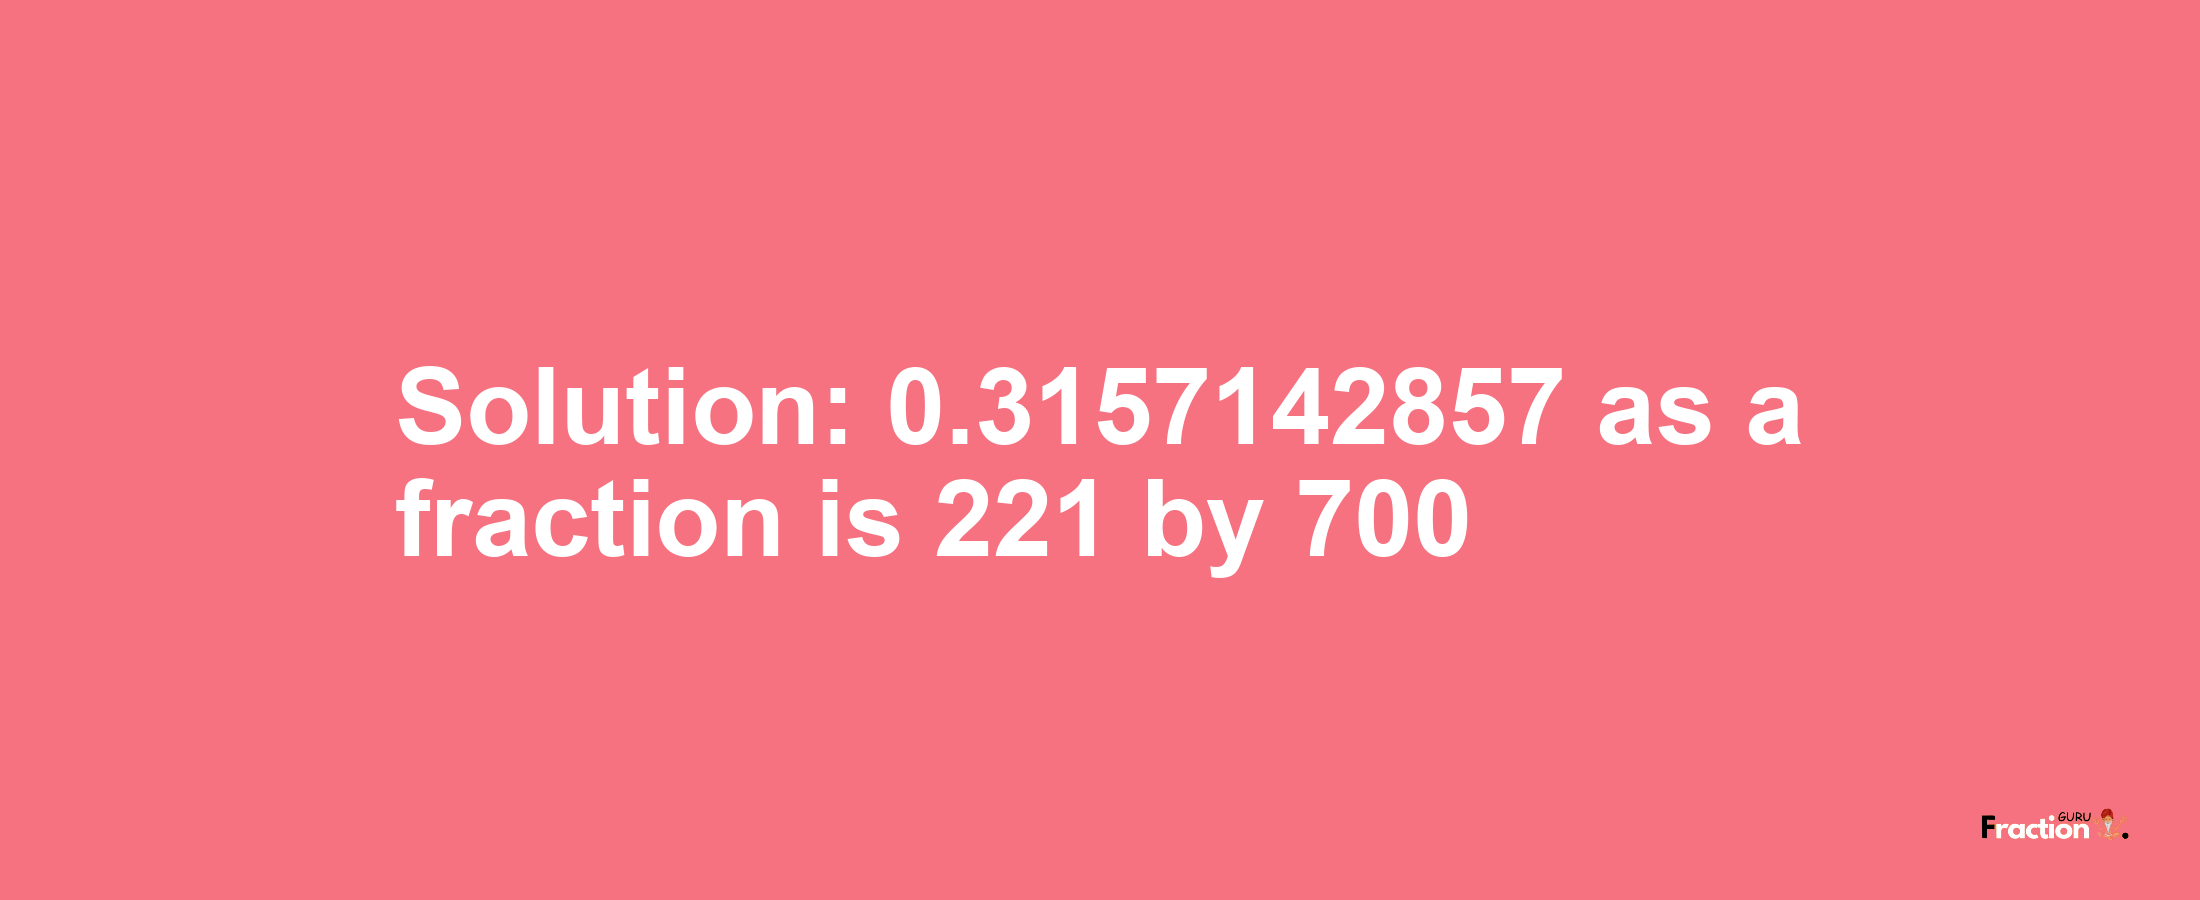 Solution:0.3157142857 as a fraction is 221/700